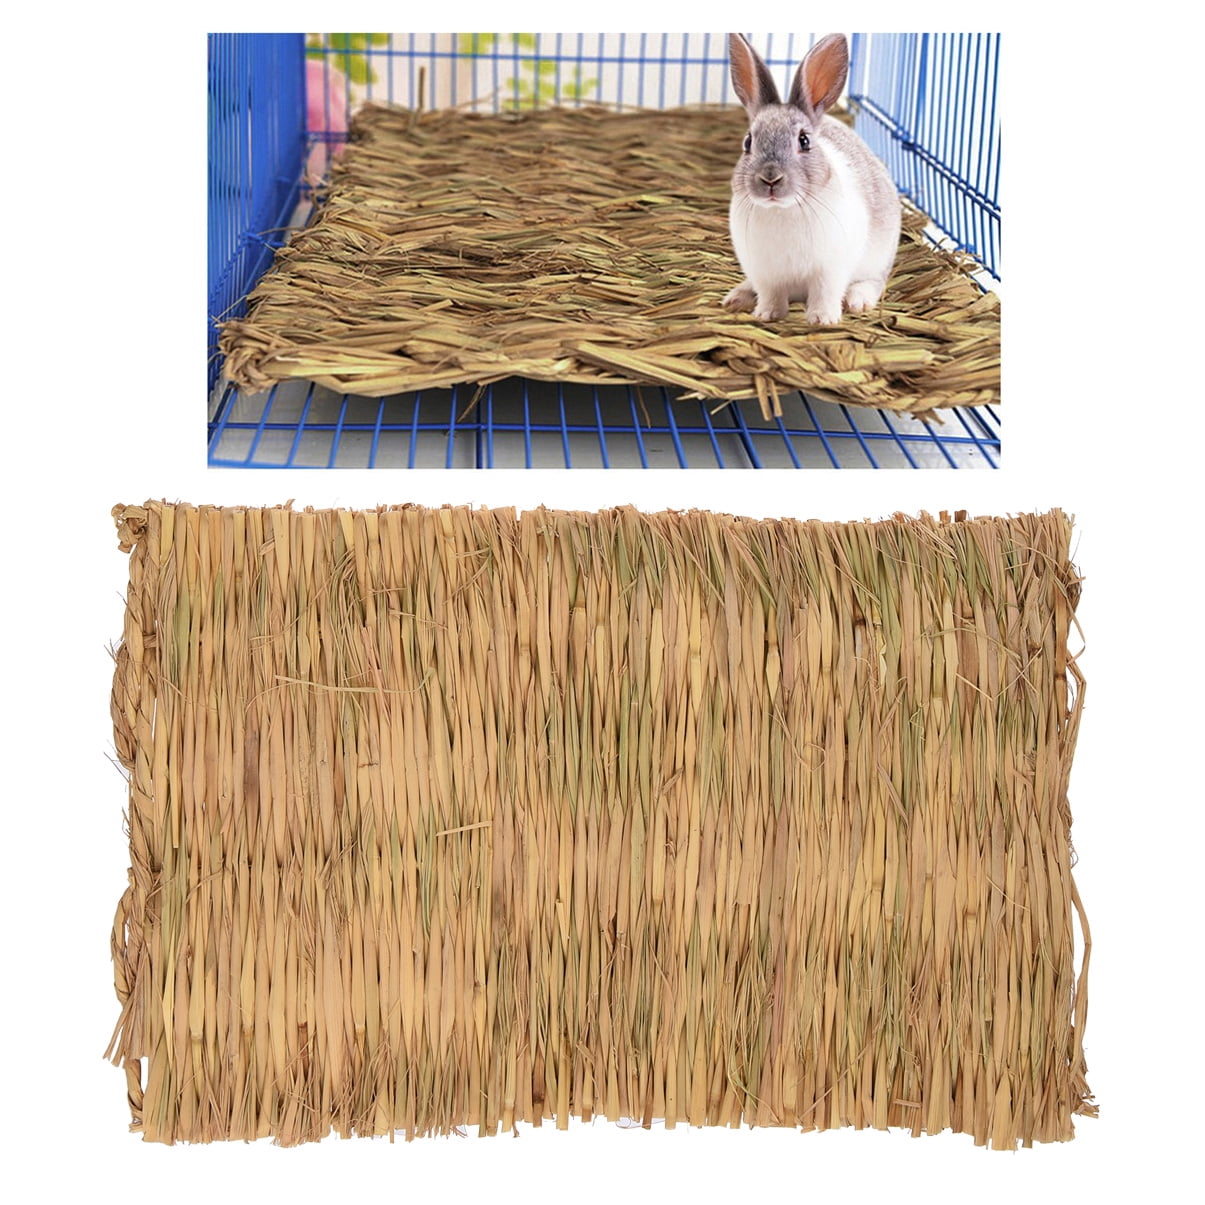 Pet Woven Grass Straw Small Rabbit Hamster Cage Nest House Chew Toy Hedgehog Bed 